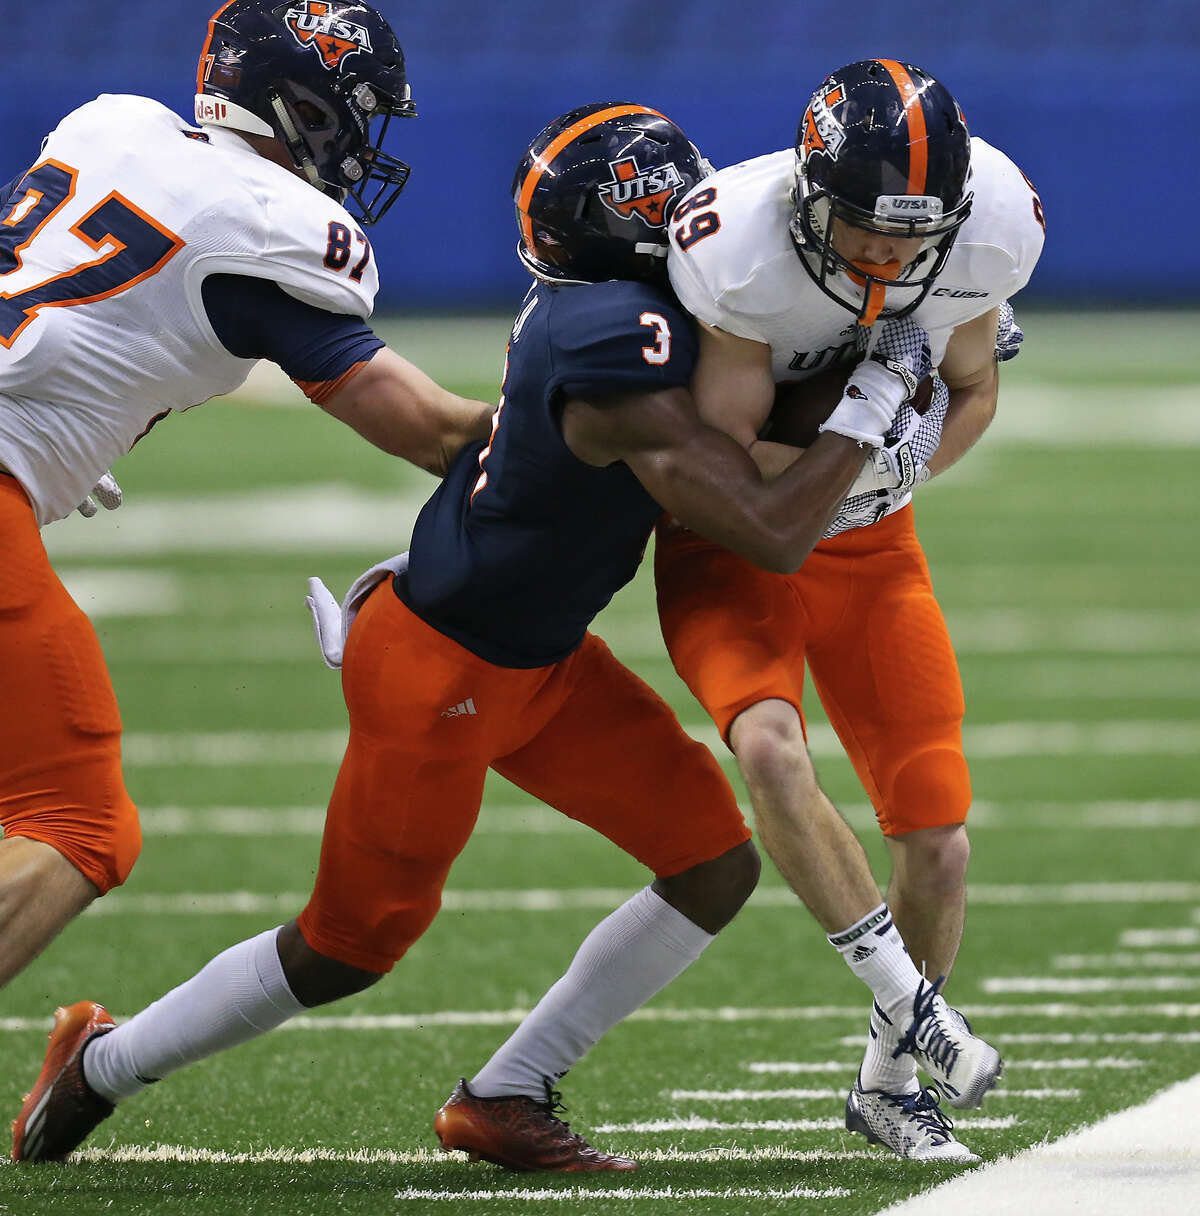 UTSA White Team's Miles Lerch is hit by UTSA Blue Team's Stanley Dye Jr. as UTSA White Team's Trevor Stevens moves in on the play during their Football Fiesta Spring Game held Saturday April 18, 2015 at the Alamodome. UTSA White Team won 57-42.